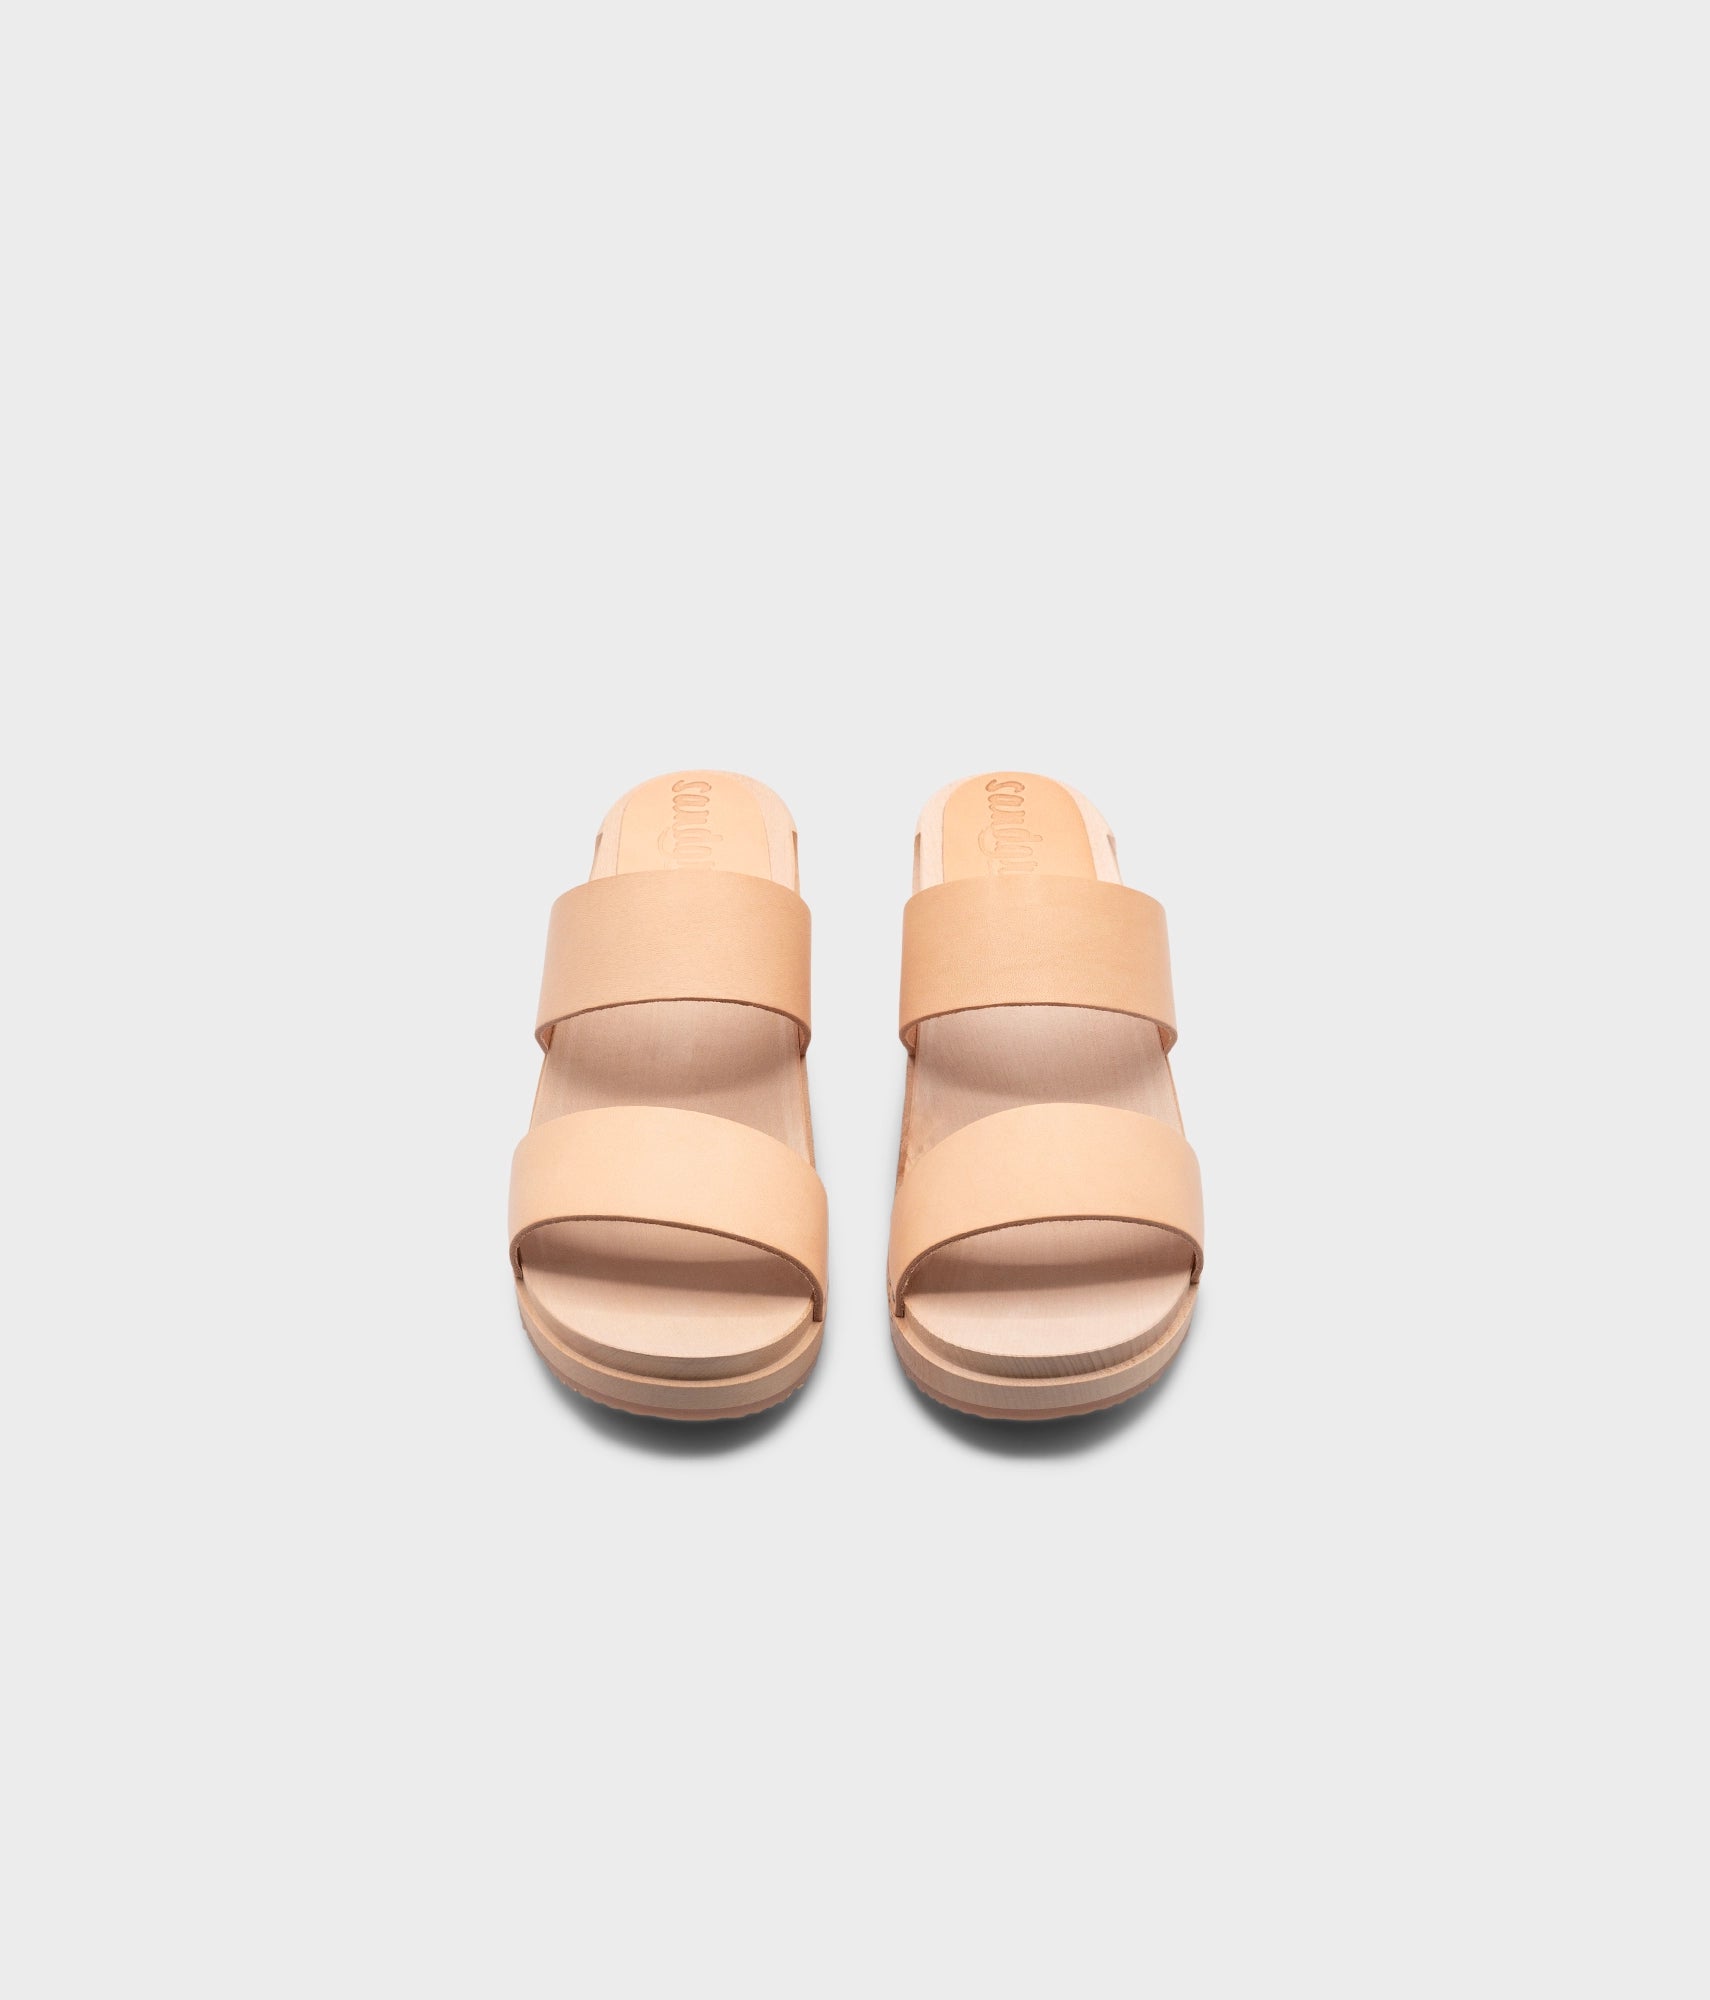 low heeled slip-in clog sandal with open toe in beige ecru vegetable tanned leather stapled on a light wooden base